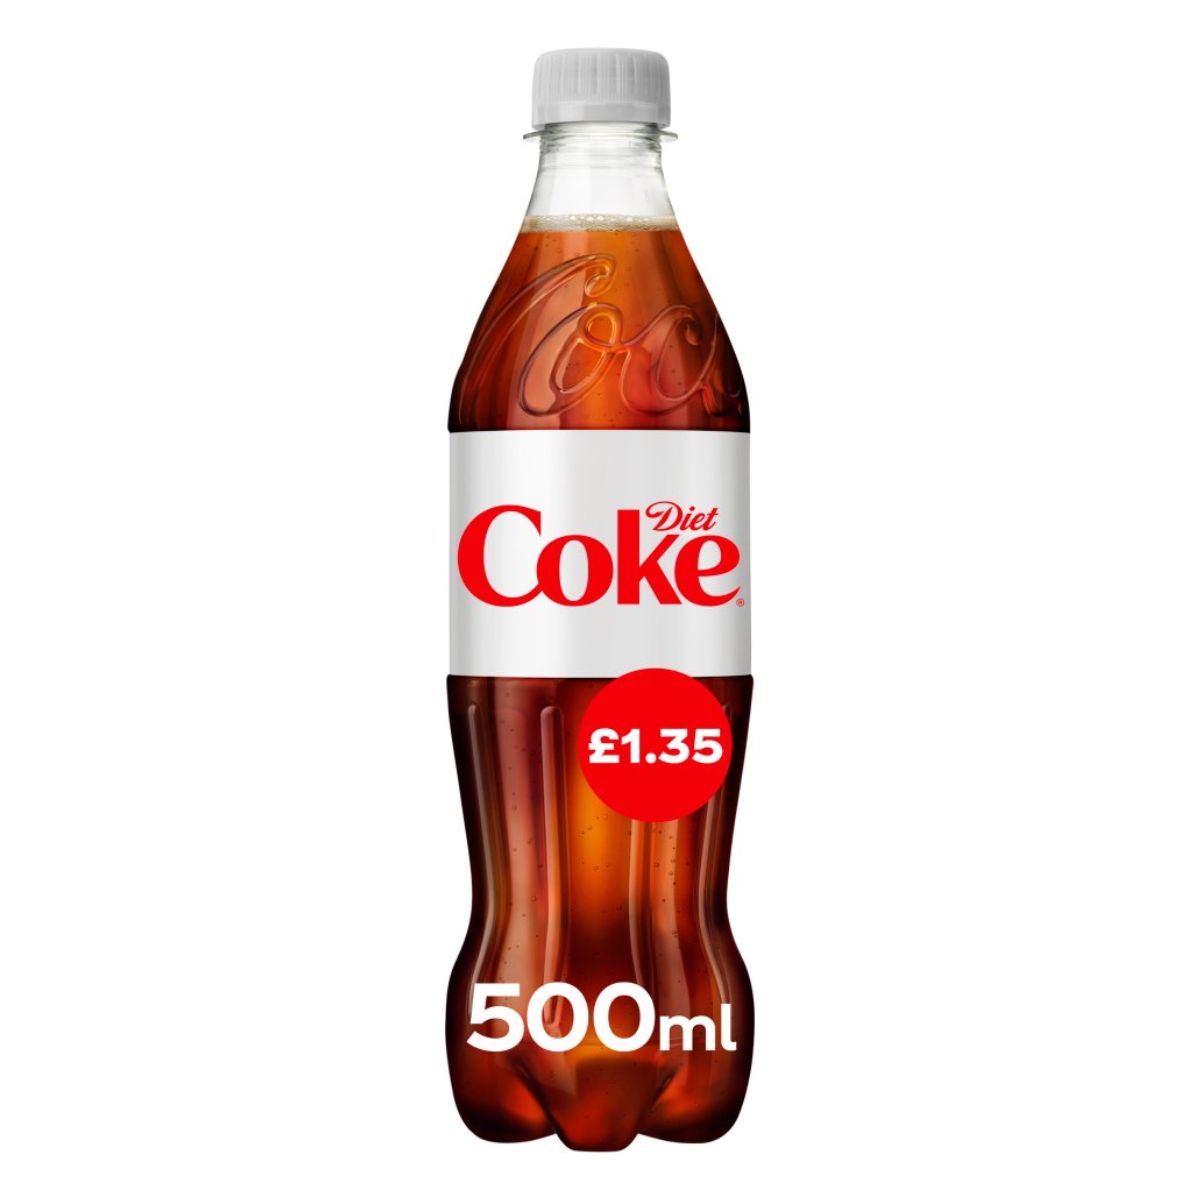 A Diet Coke - Cola - 500ml bottle with a price label of £1.35, featuring the classic logo on a white band around the center.